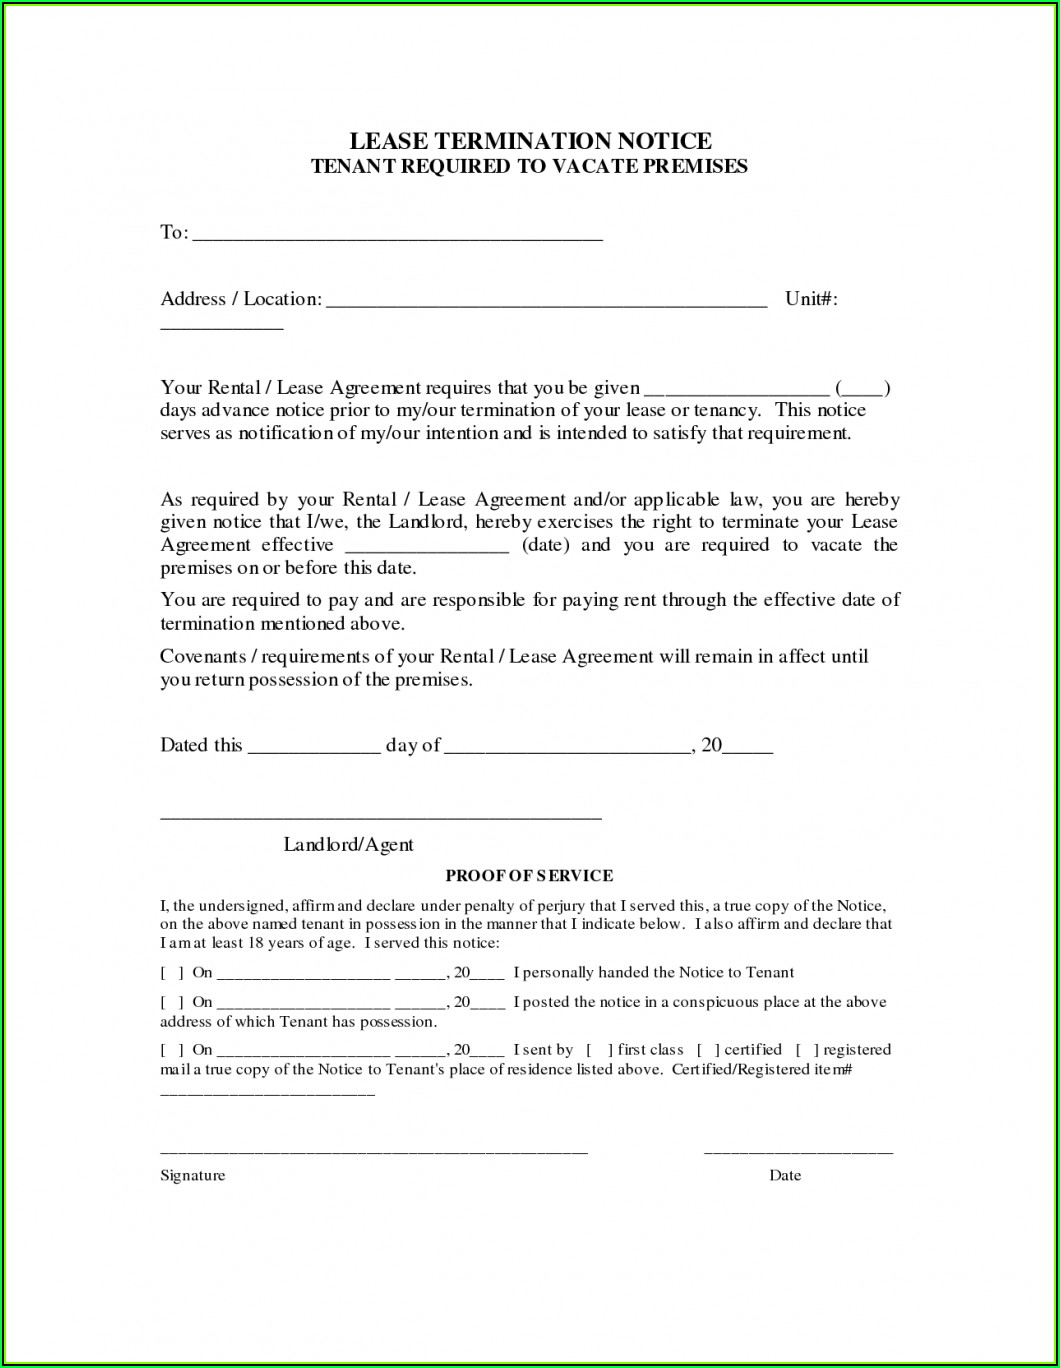 Sample Of Lease Agreement Termination Letter